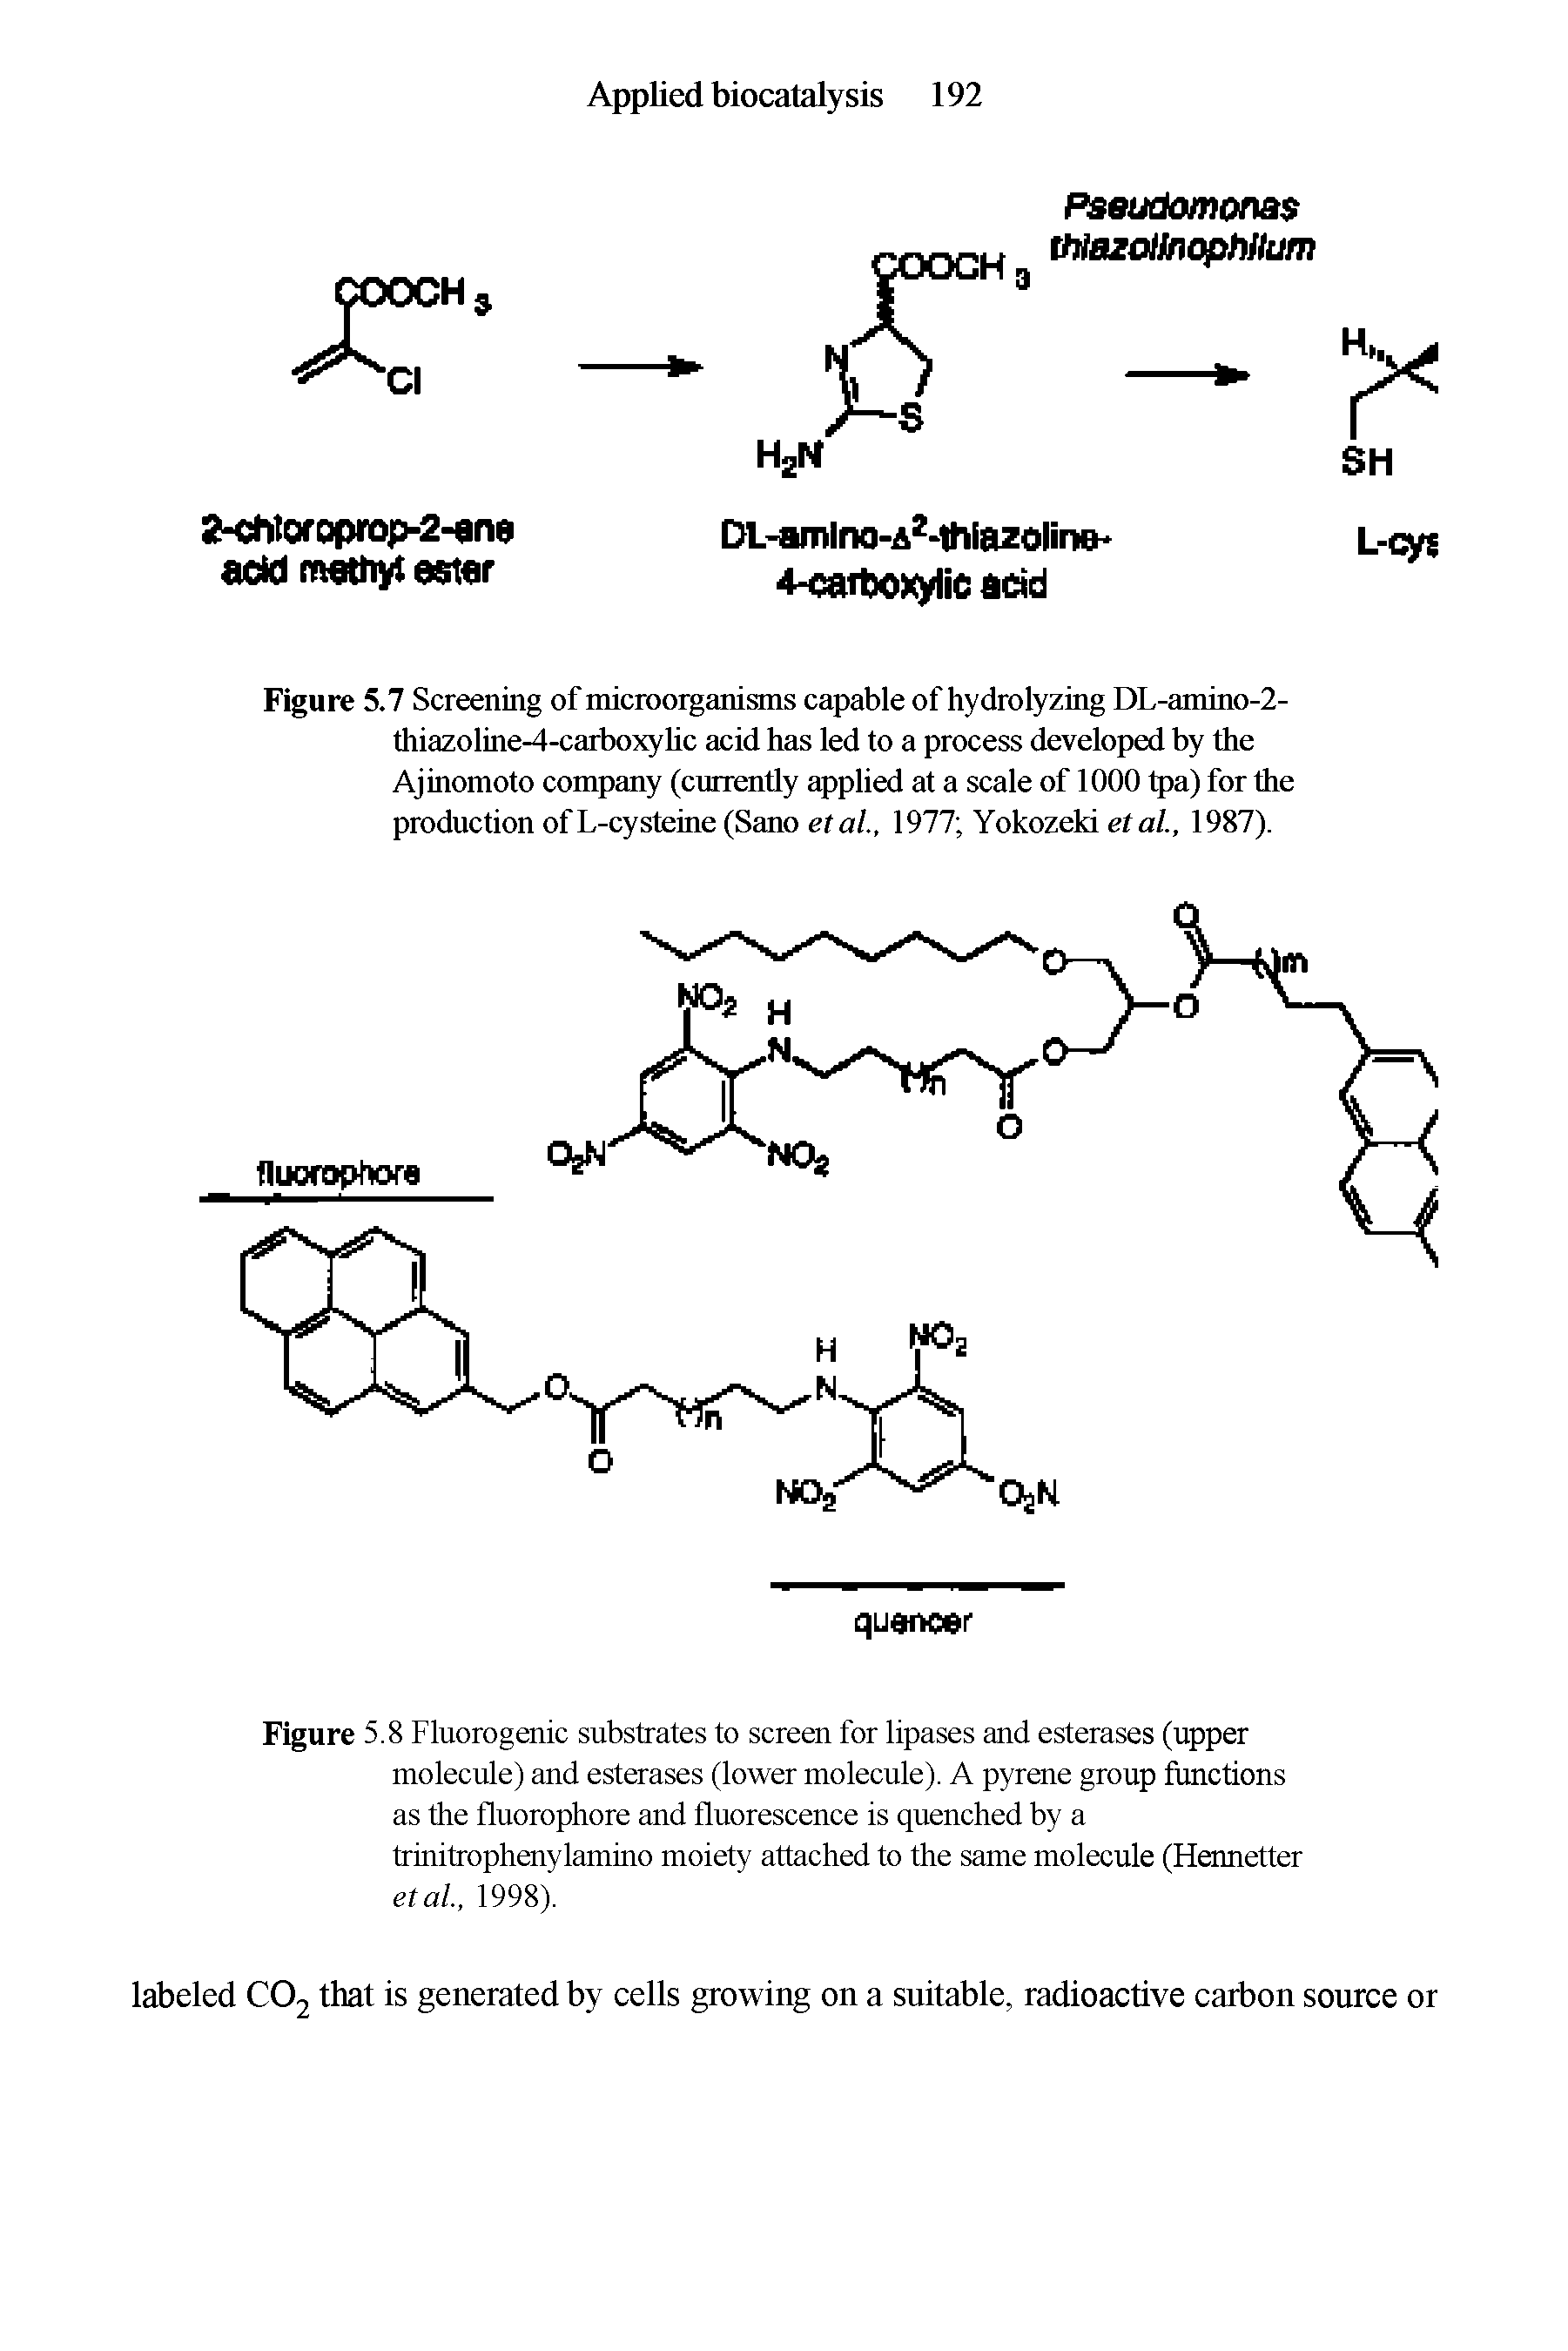 Figure 5.7 Screening of microorganisms capable of hydrolyzing DL-amino-2-thiazolme-4-carboxyhc acid has led to a process developed by the Ajinomoto company (currently applied at a scale of 1000 tpa) for the production of L-cysteine (Sano etai, 1977 Yokozeki etal., 1987).